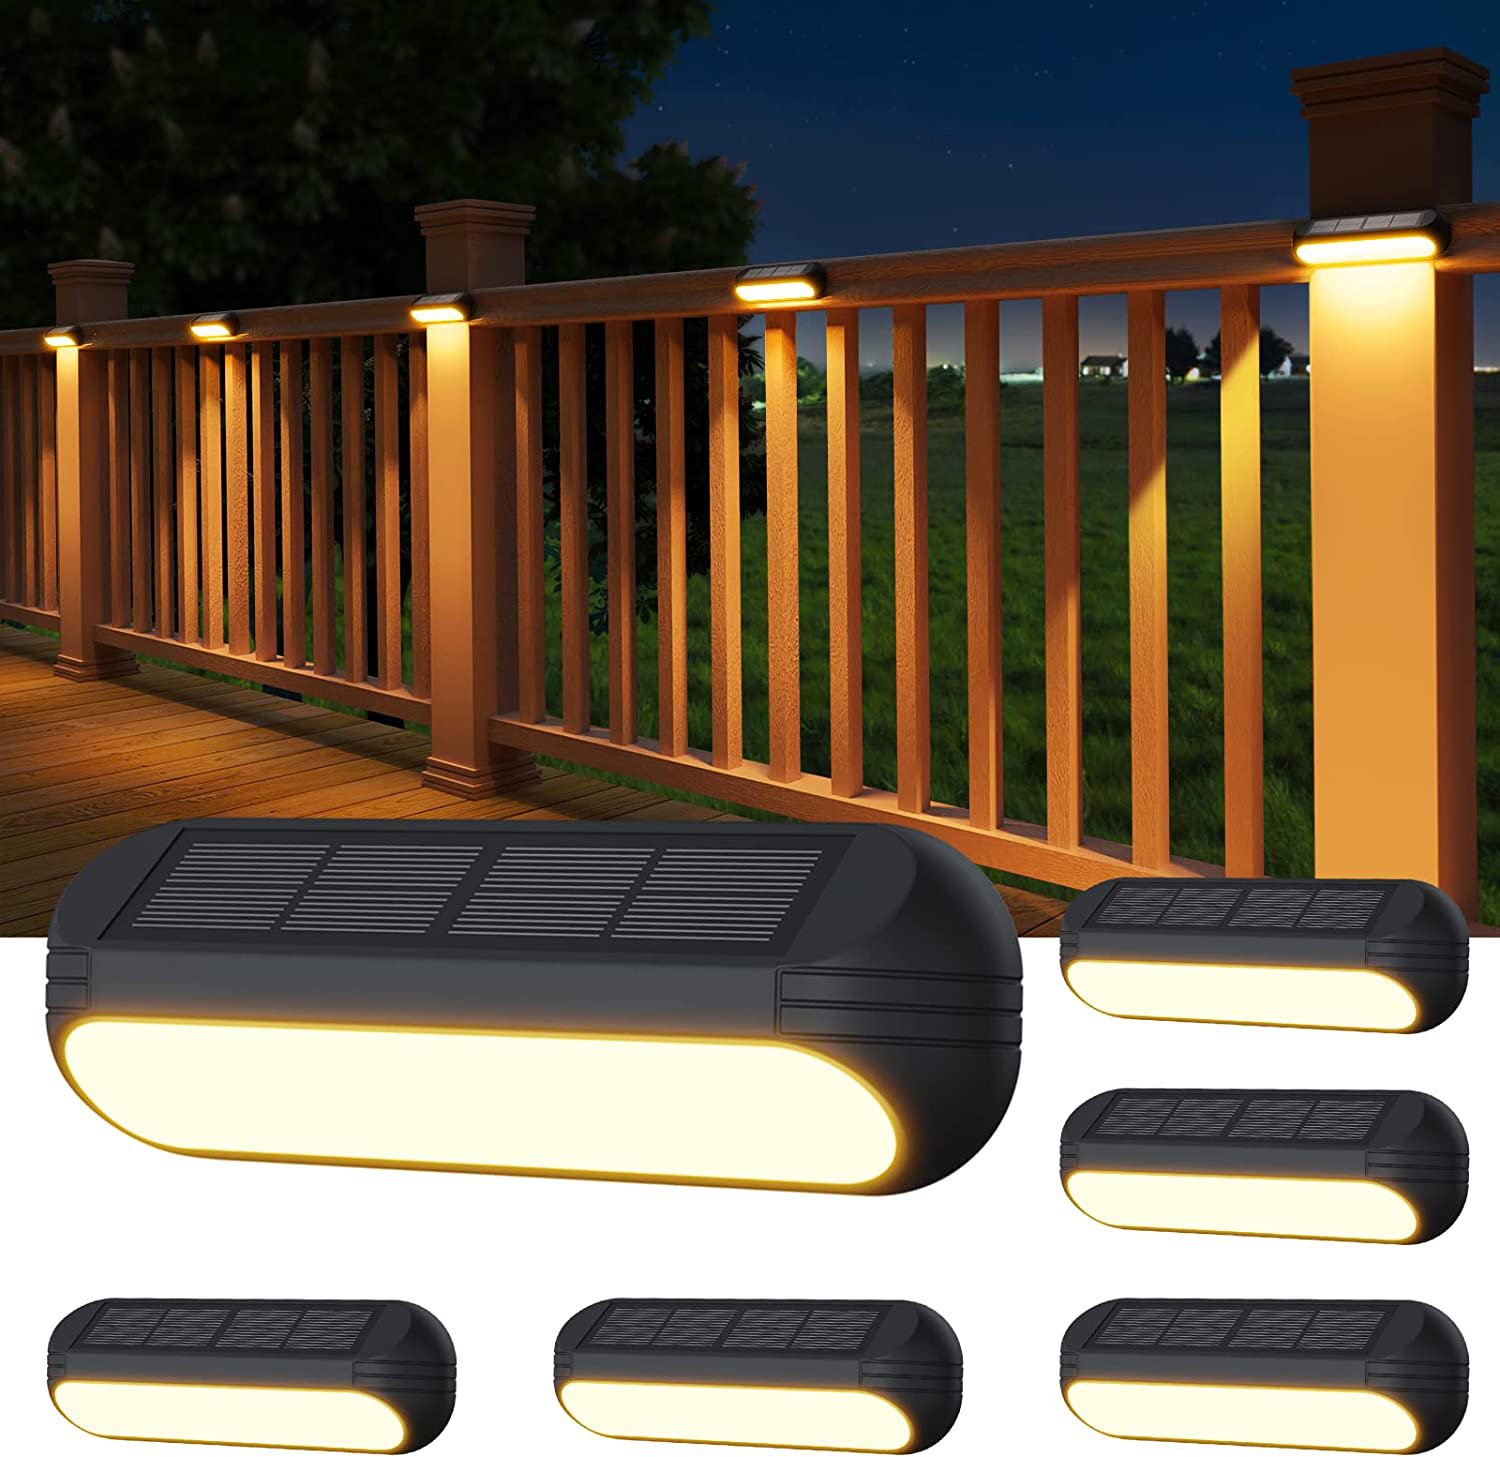 OTHWAY Solar Fence Post Lights Wall Mount Decorative Deck Lighting White 4 Packs 